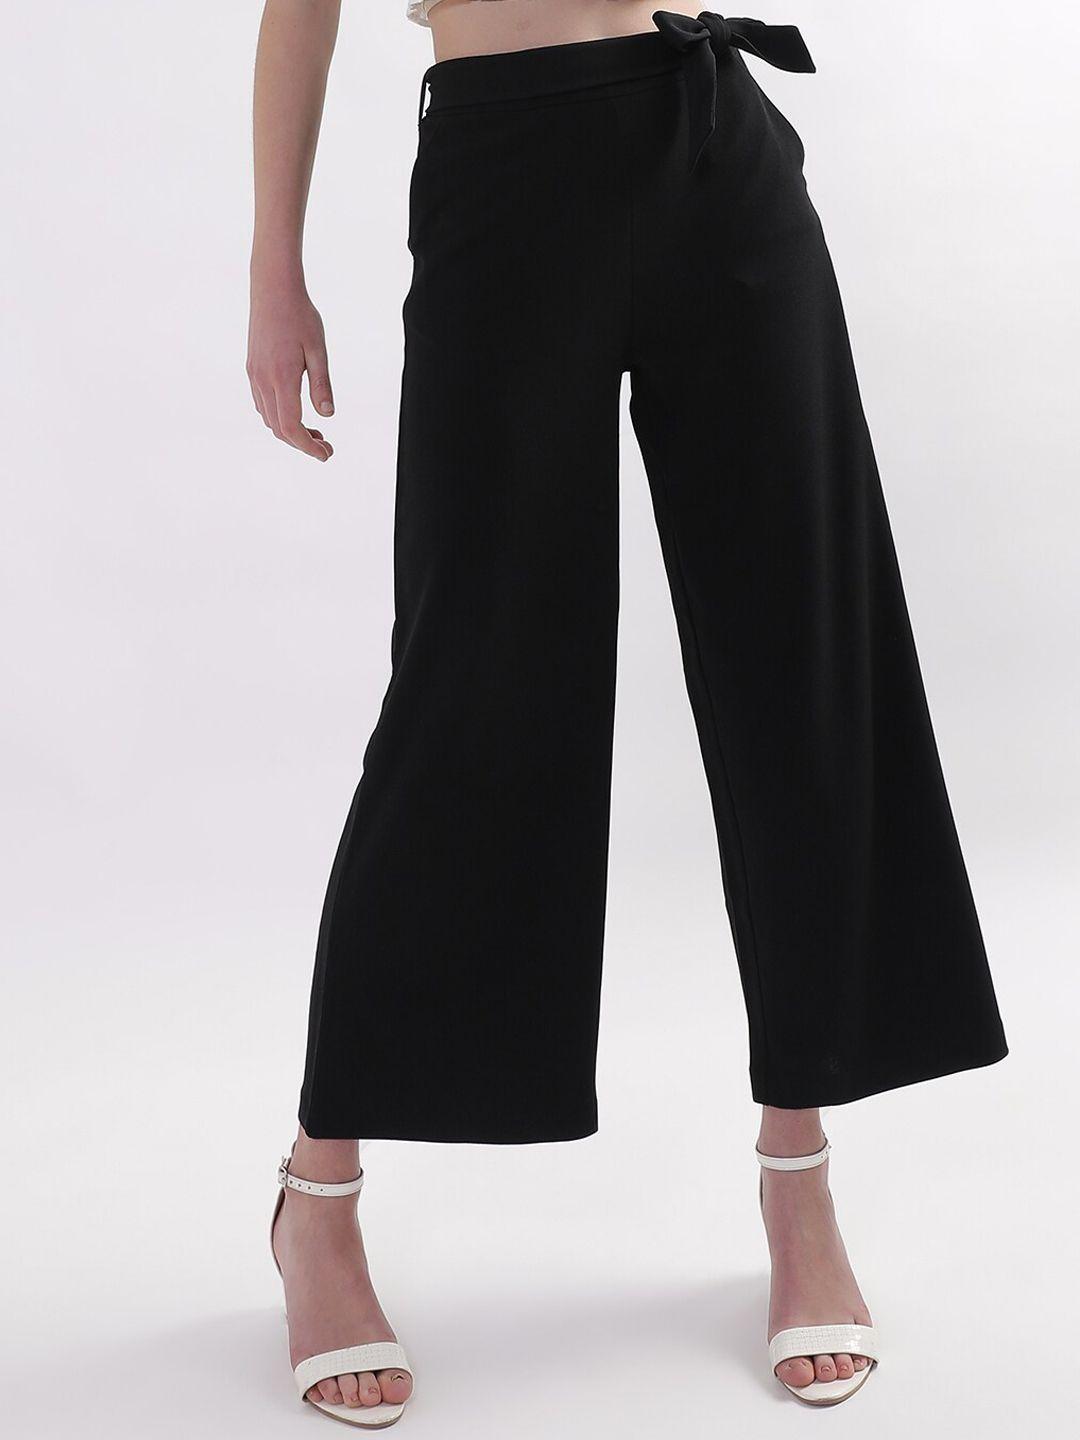 centrestage women mid-rise flared parallel trousers